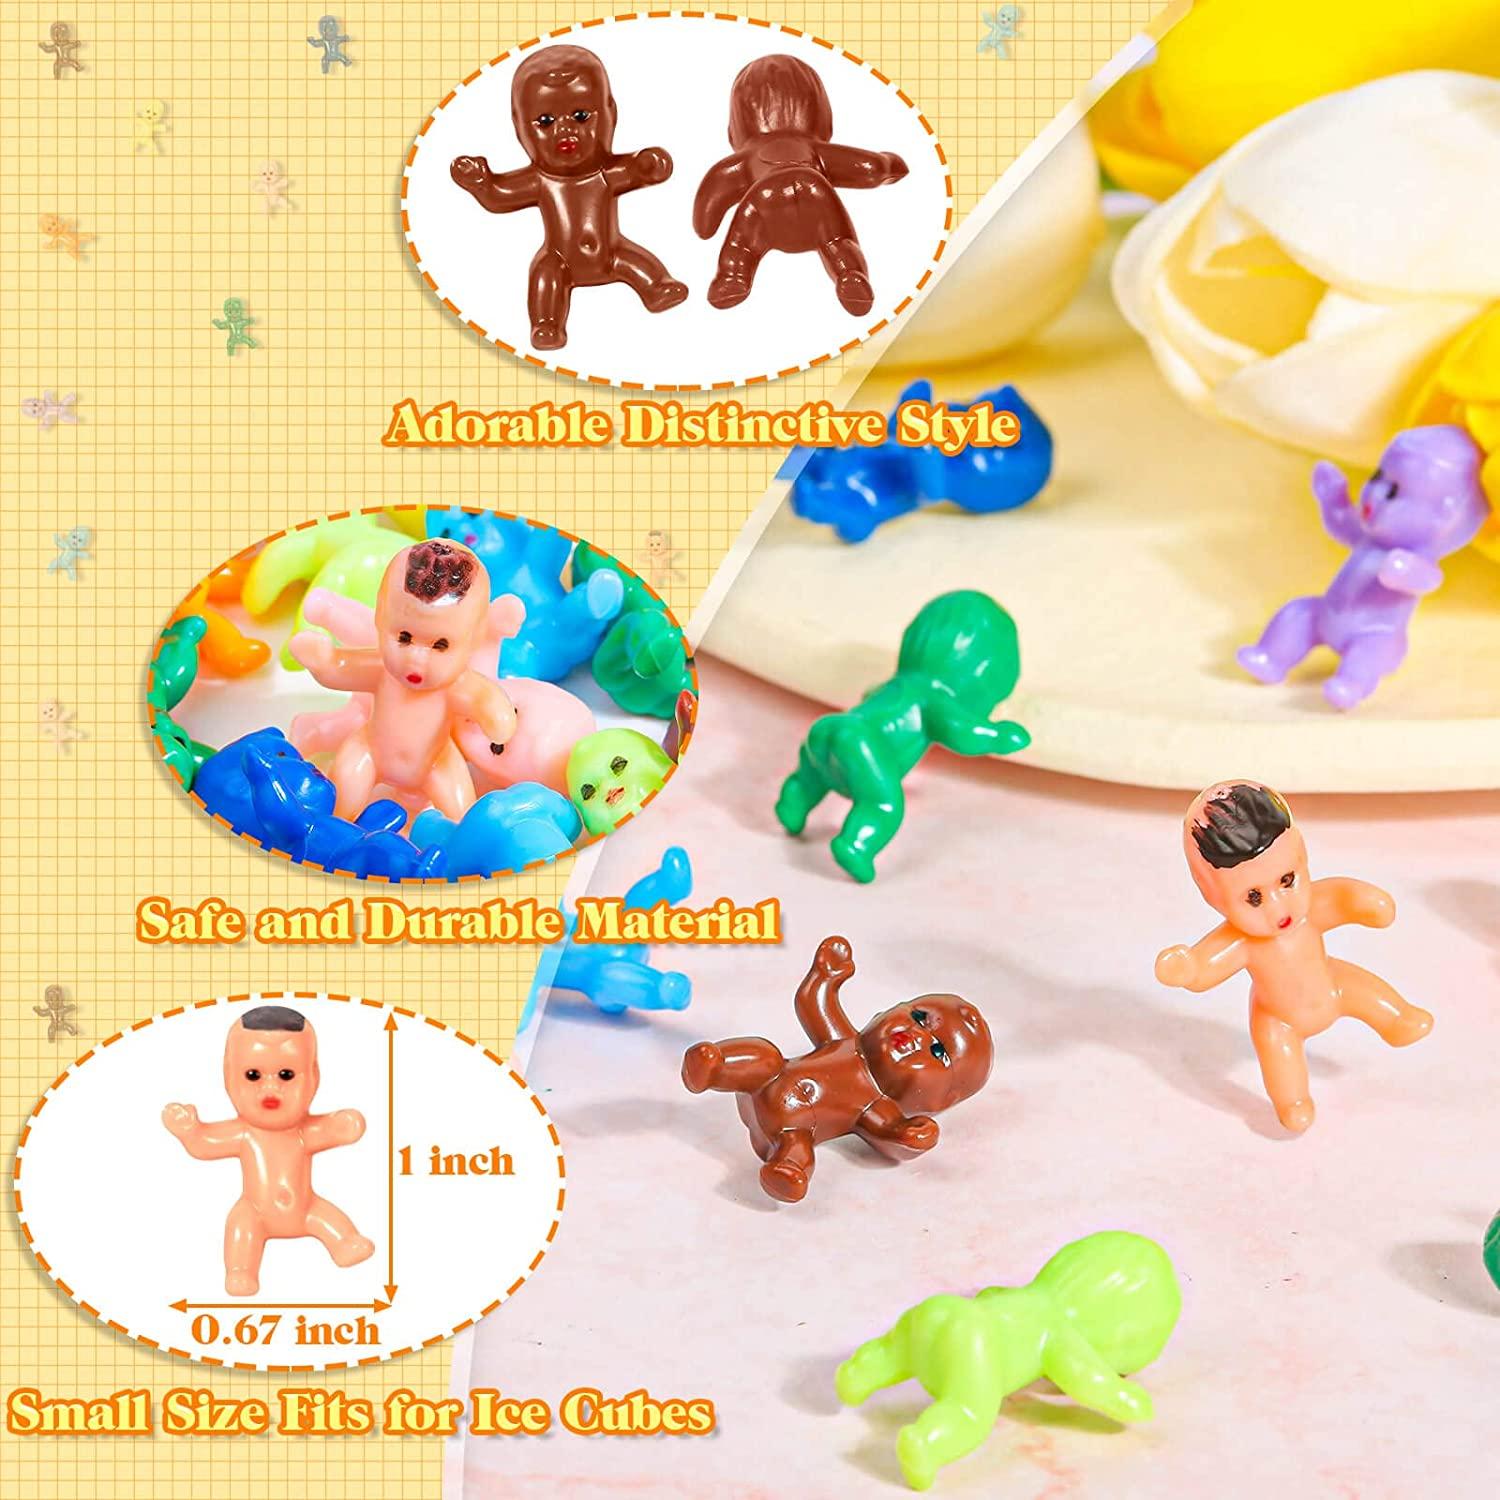 Mini Plastic Babies, Selizo 100pcs Tiny Plastic Baby Figurines Small King  Cake Babies Bulk for Ice Cube My Water Broke Baby Shower Games (10 Colors)  10 Colors 100 Pieces